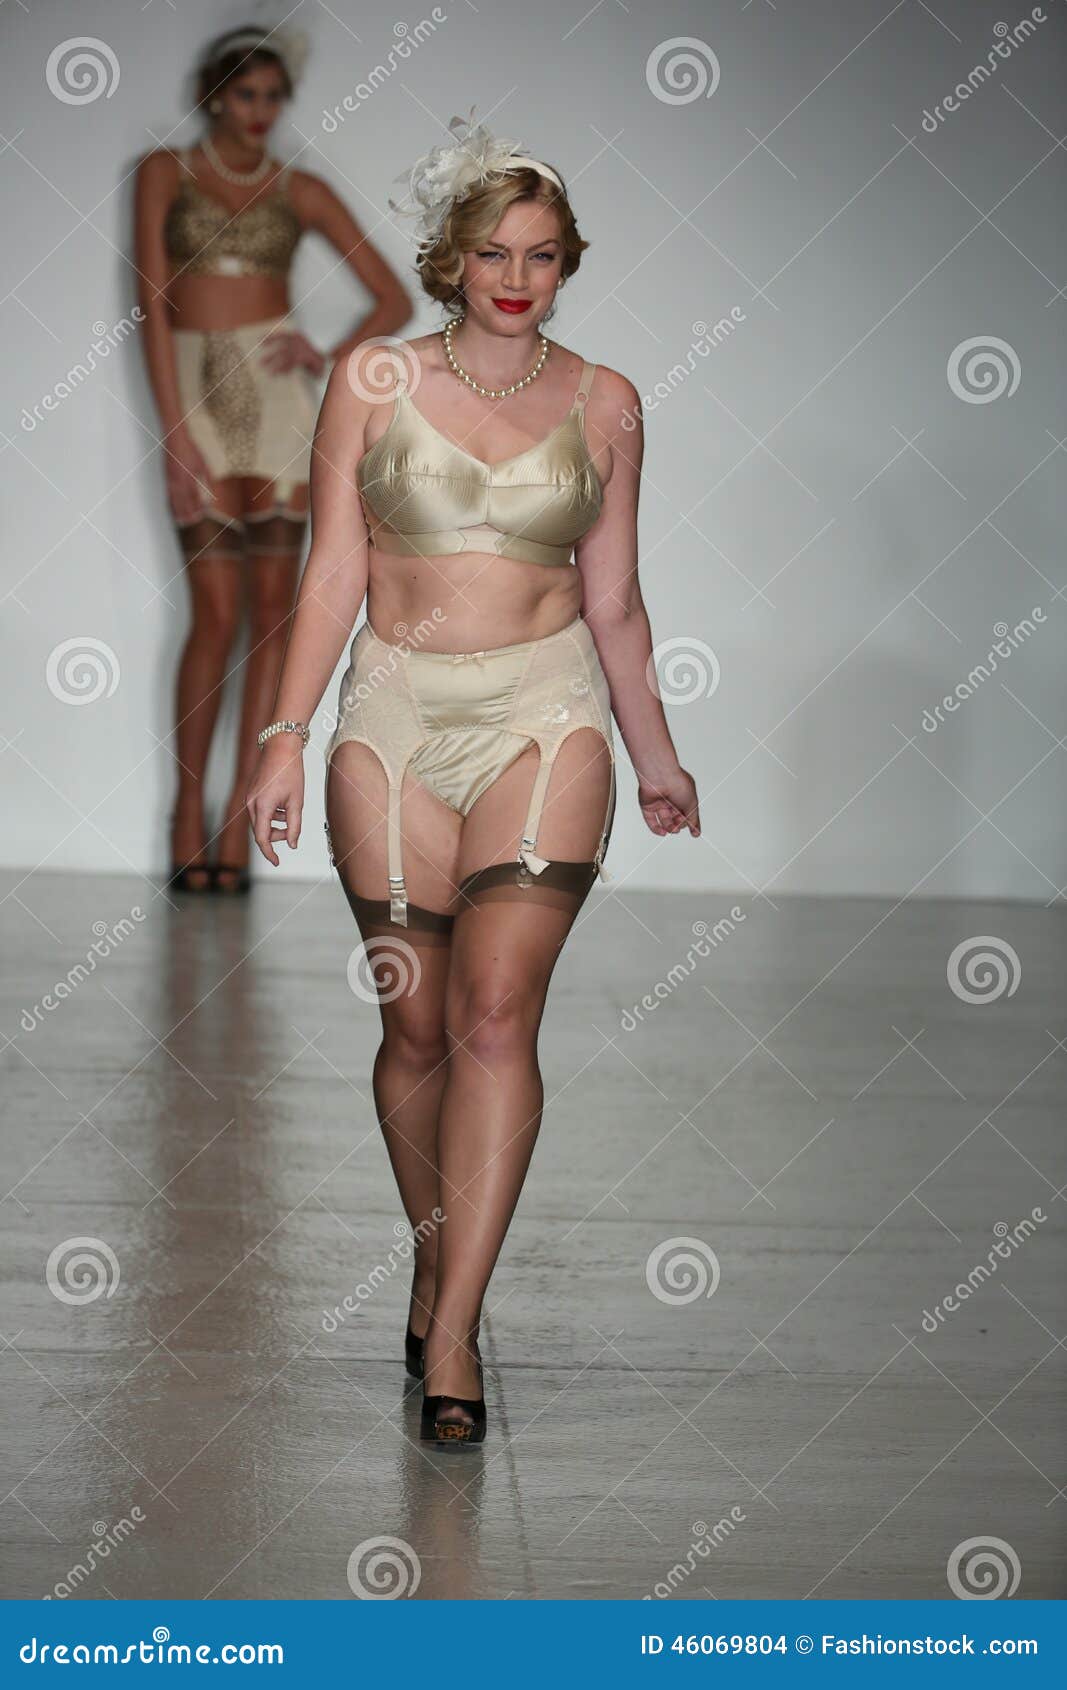 NEW YORK, NY - OCTOBER 24: a Model Walks Runway Wearing Secrets in Lace  Lingerie Spring 2015 Collection Editorial Stock Image - Image of model,  october: 46069804